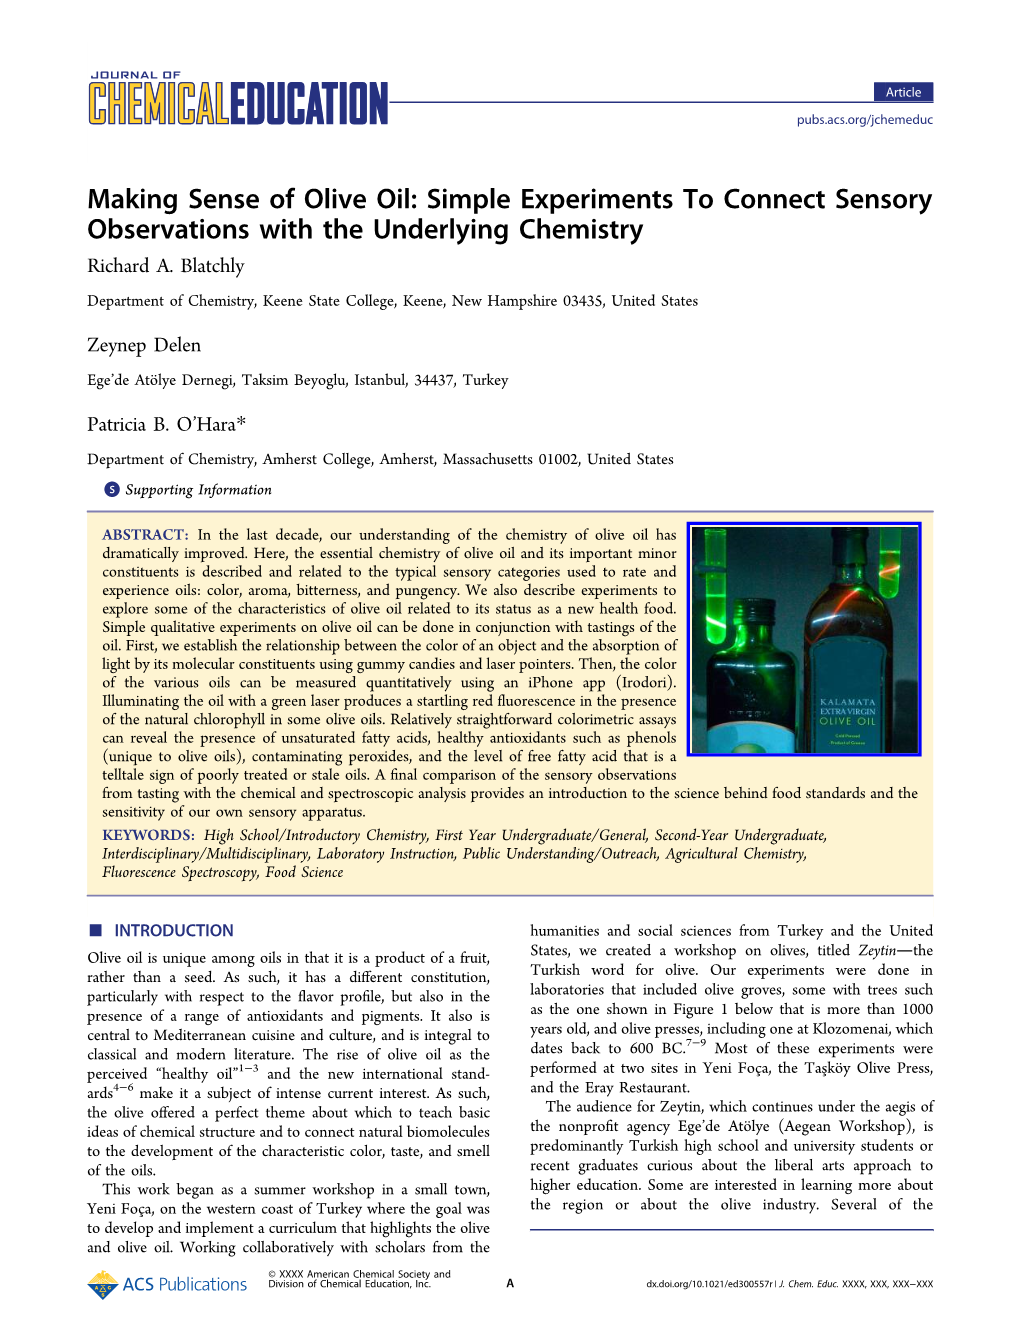 Making Sense of Olive Oil: Simple Experiments to Connect Sensory Observations with the Underlying Chemistry Richard A